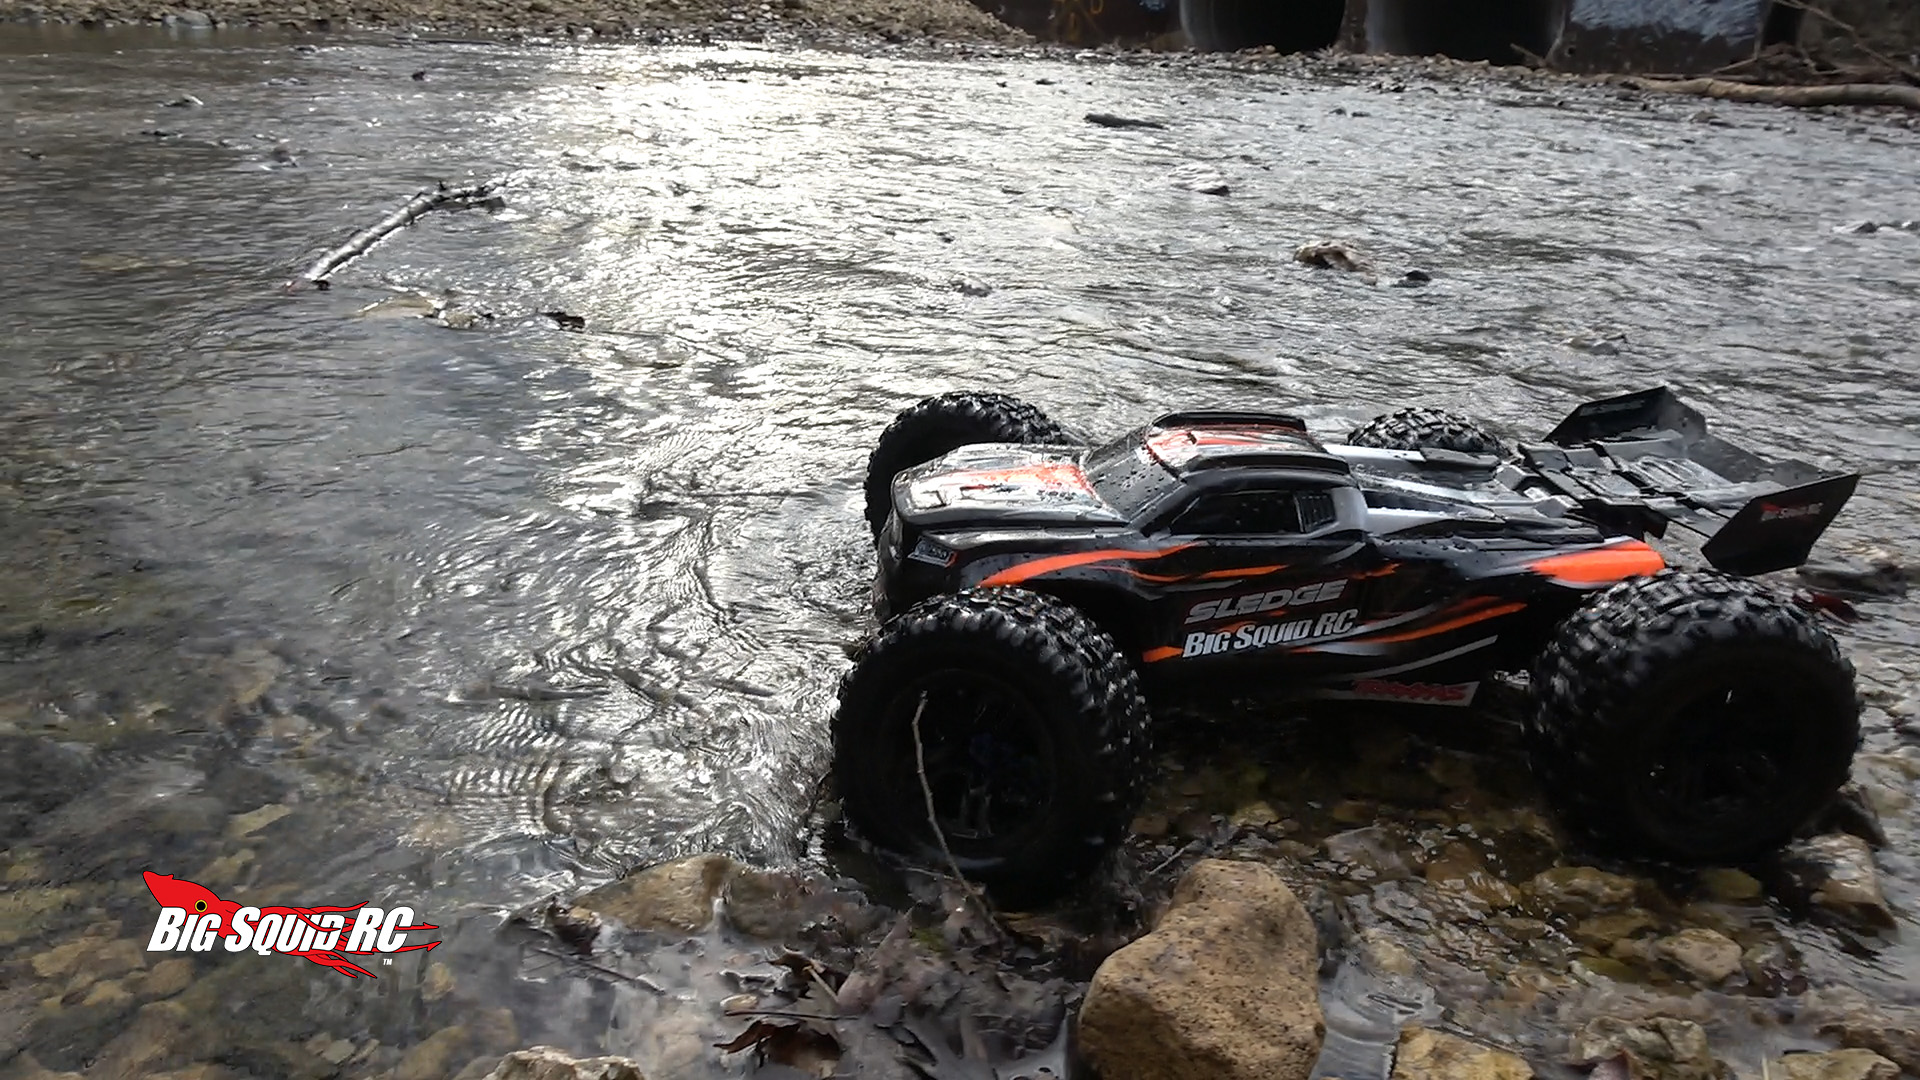 Traxxas Sledge Review Done Quick Big Squid Rc Rc Car And Truck News Reviews Videos And More